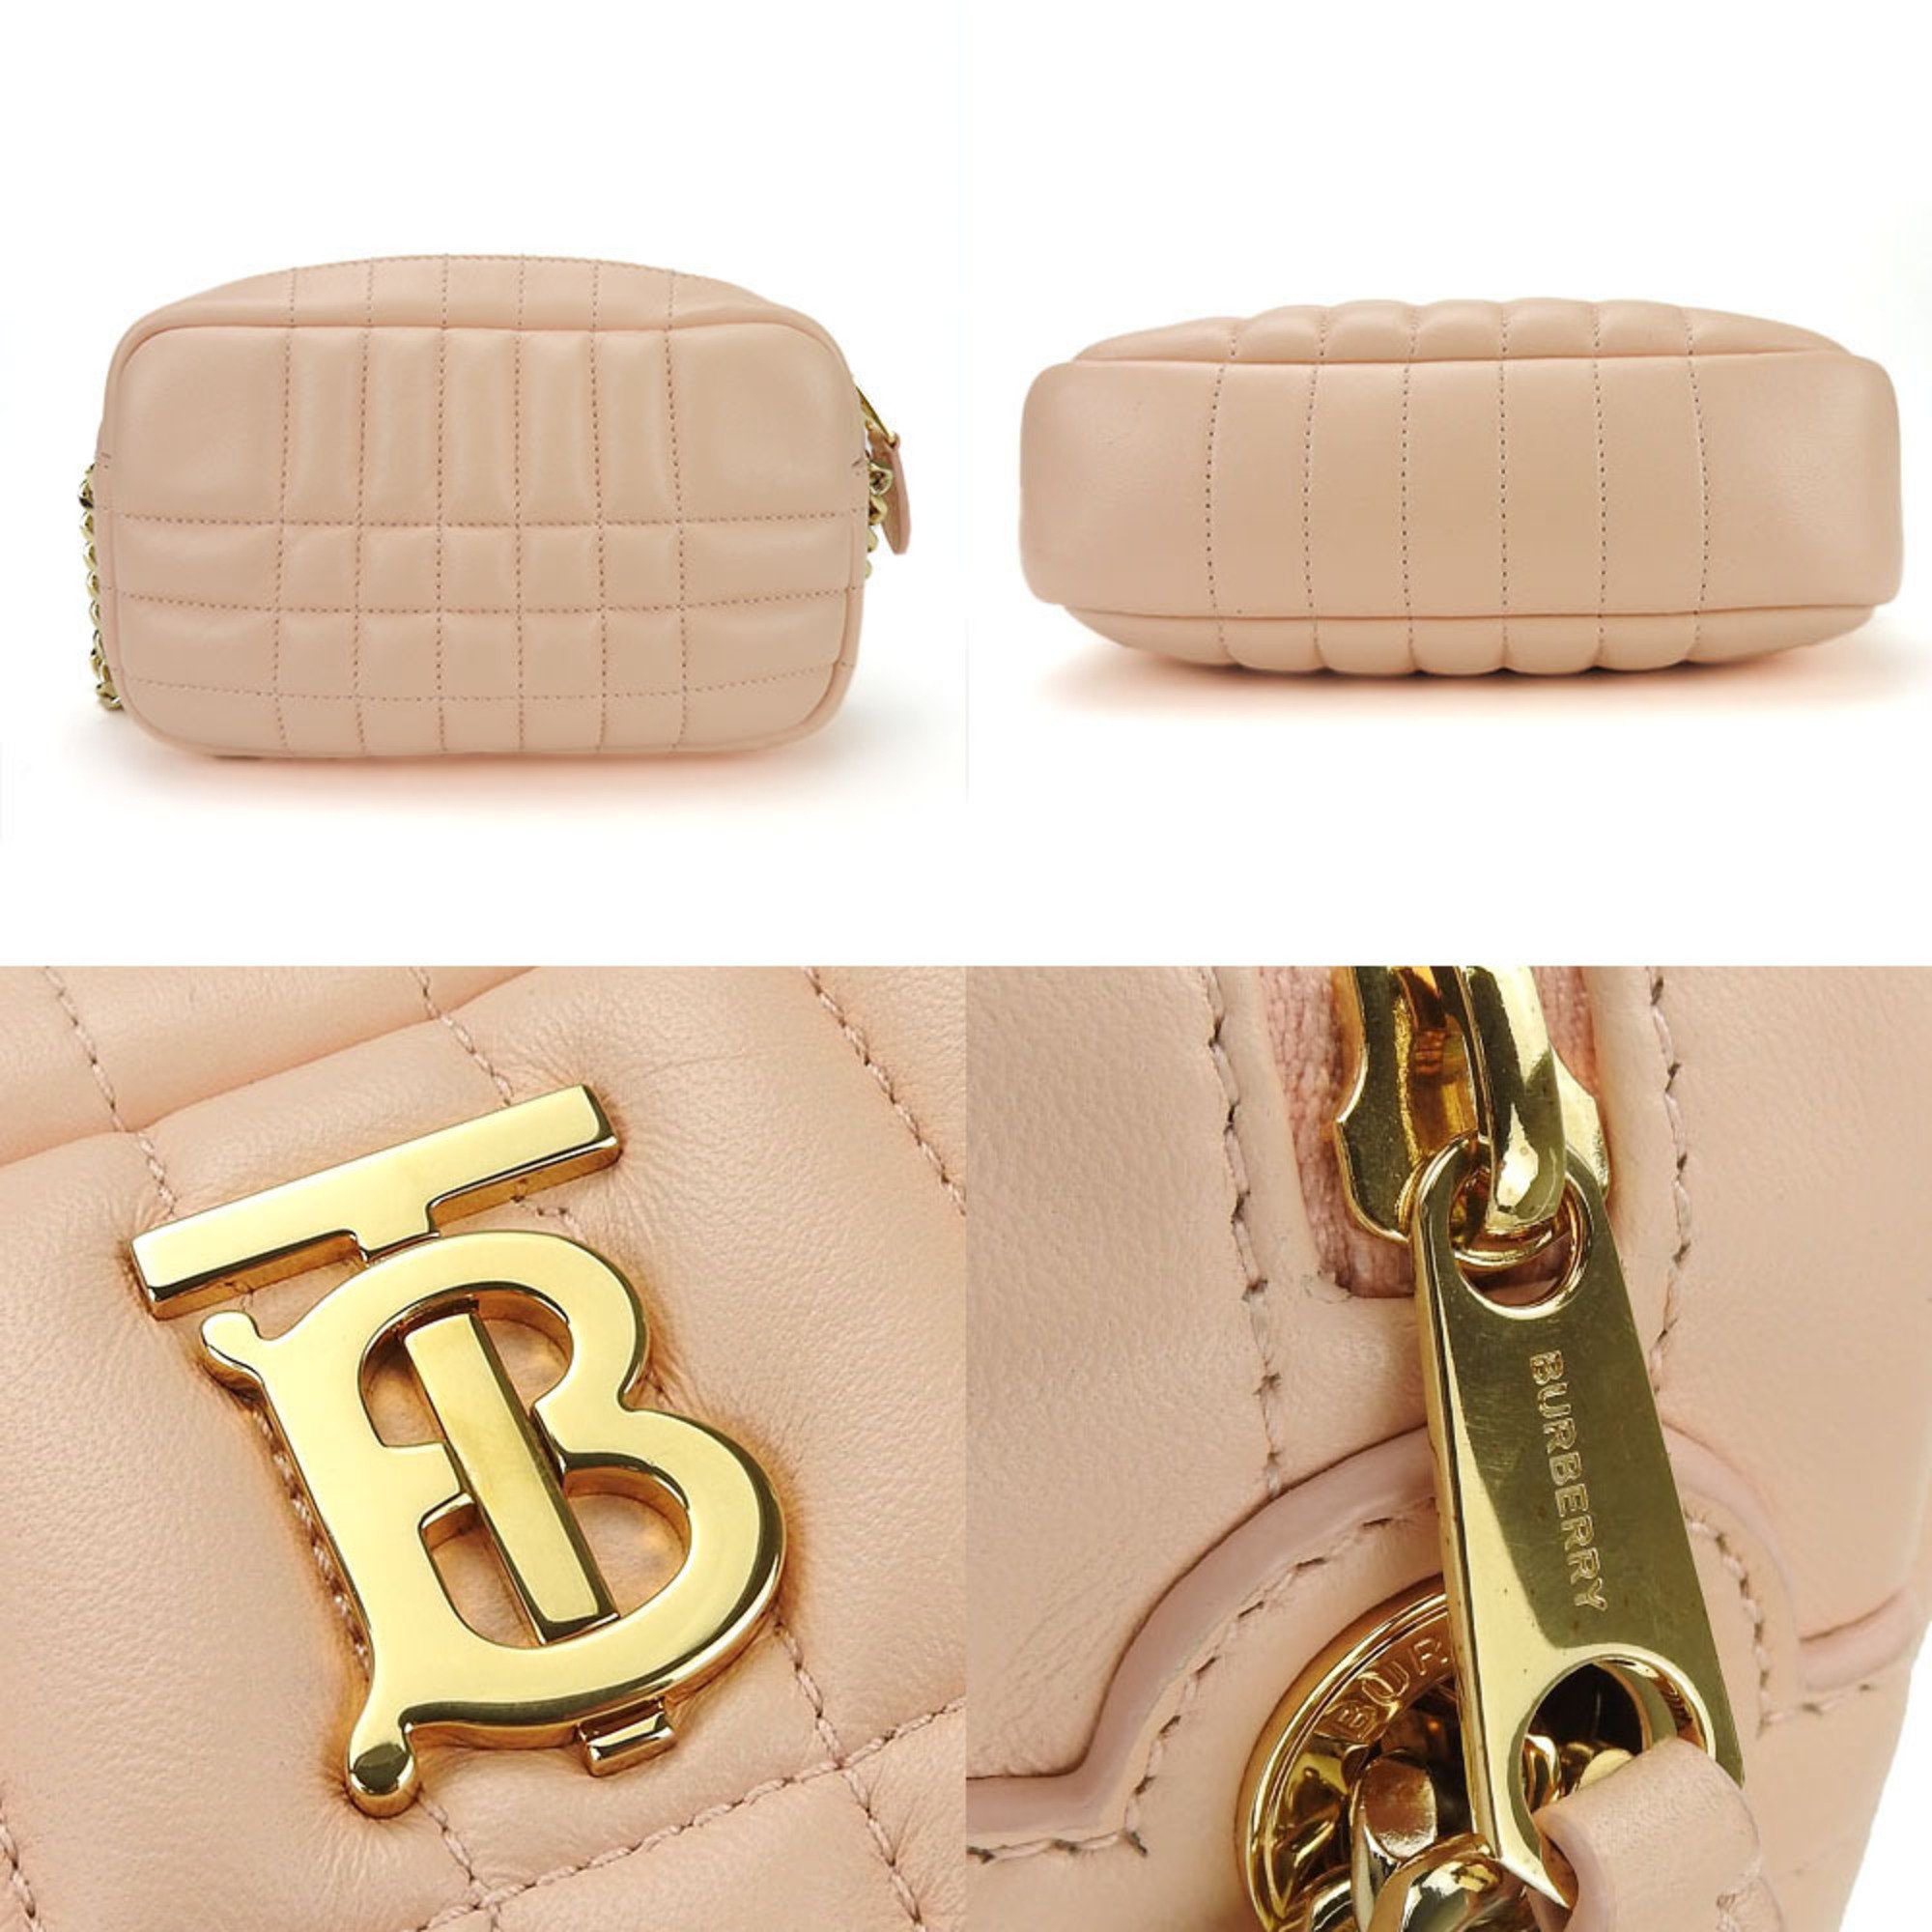 Burberry Shoulder Bag Lola Camera Quilted Leather Pink Women's BURBERRY